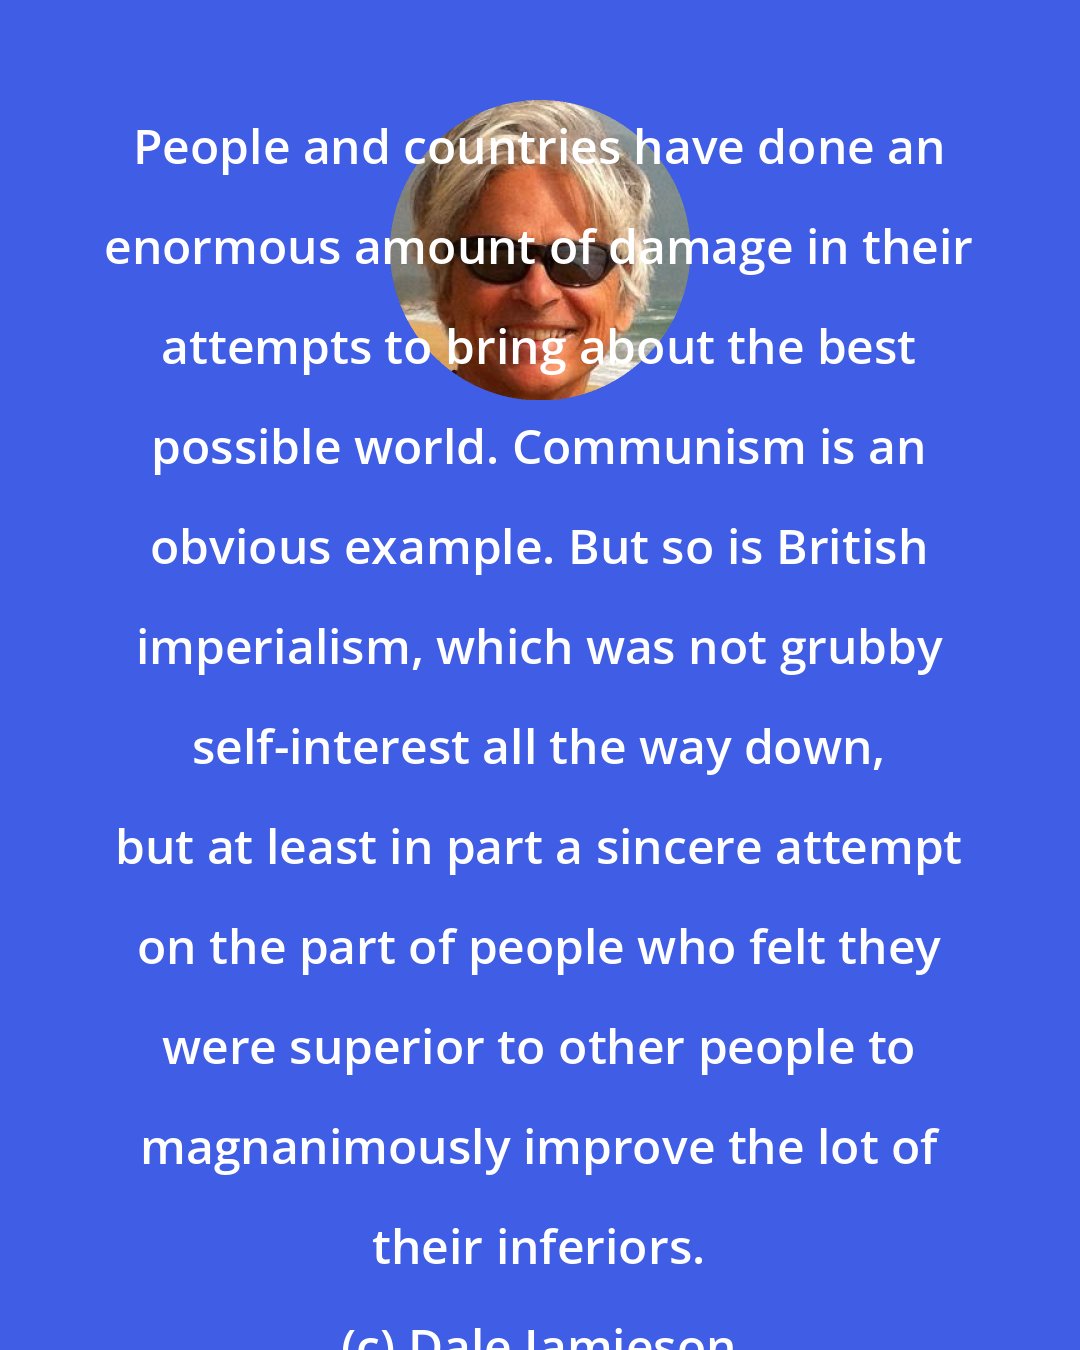 Dale Jamieson: People and countries have done an enormous amount of damage in their attempts to bring about the best possible world. Communism is an obvious example. But so is British imperialism, which was not grubby self-interest all the way down, but at least in part a sincere attempt on the part of people who felt they were superior to other people to magnanimously improve the lot of their inferiors.